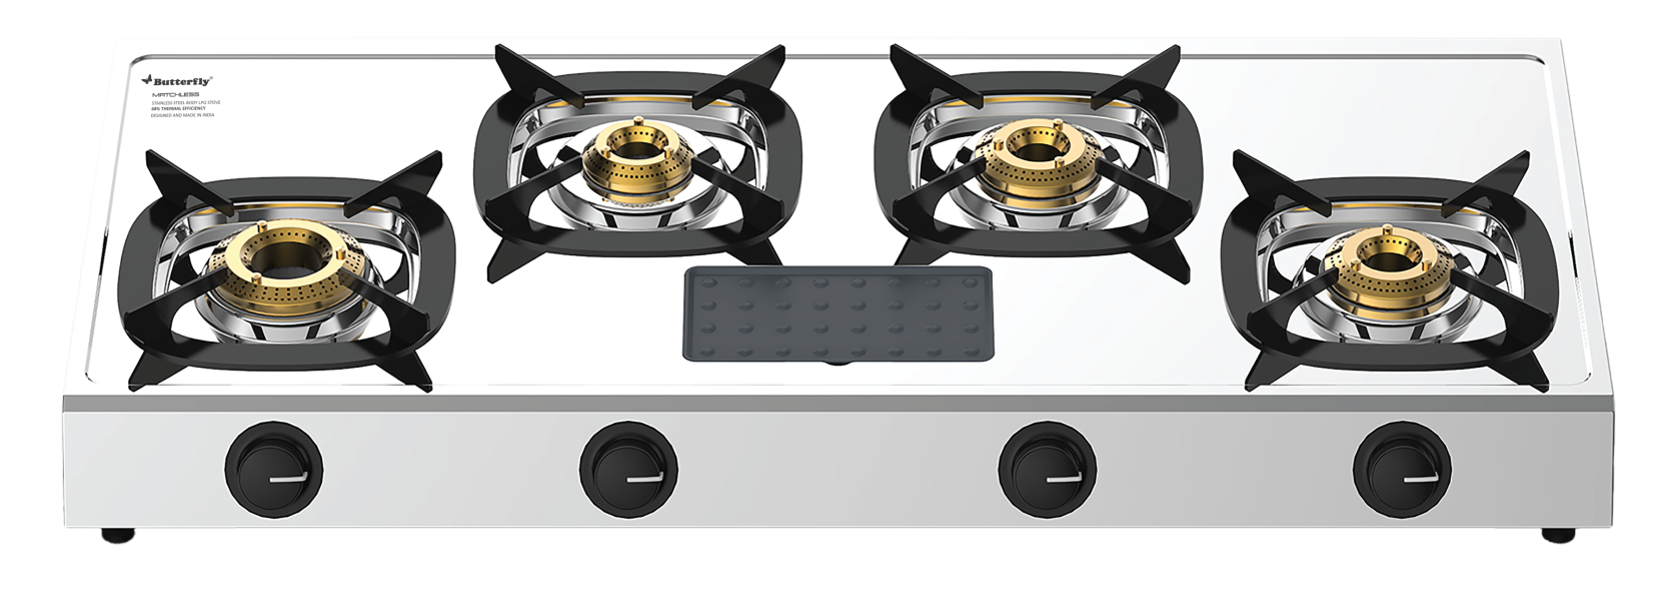 Butterfly Matchless Stainless Steel 4 Burner LPG Gas Stove | Manual ignition